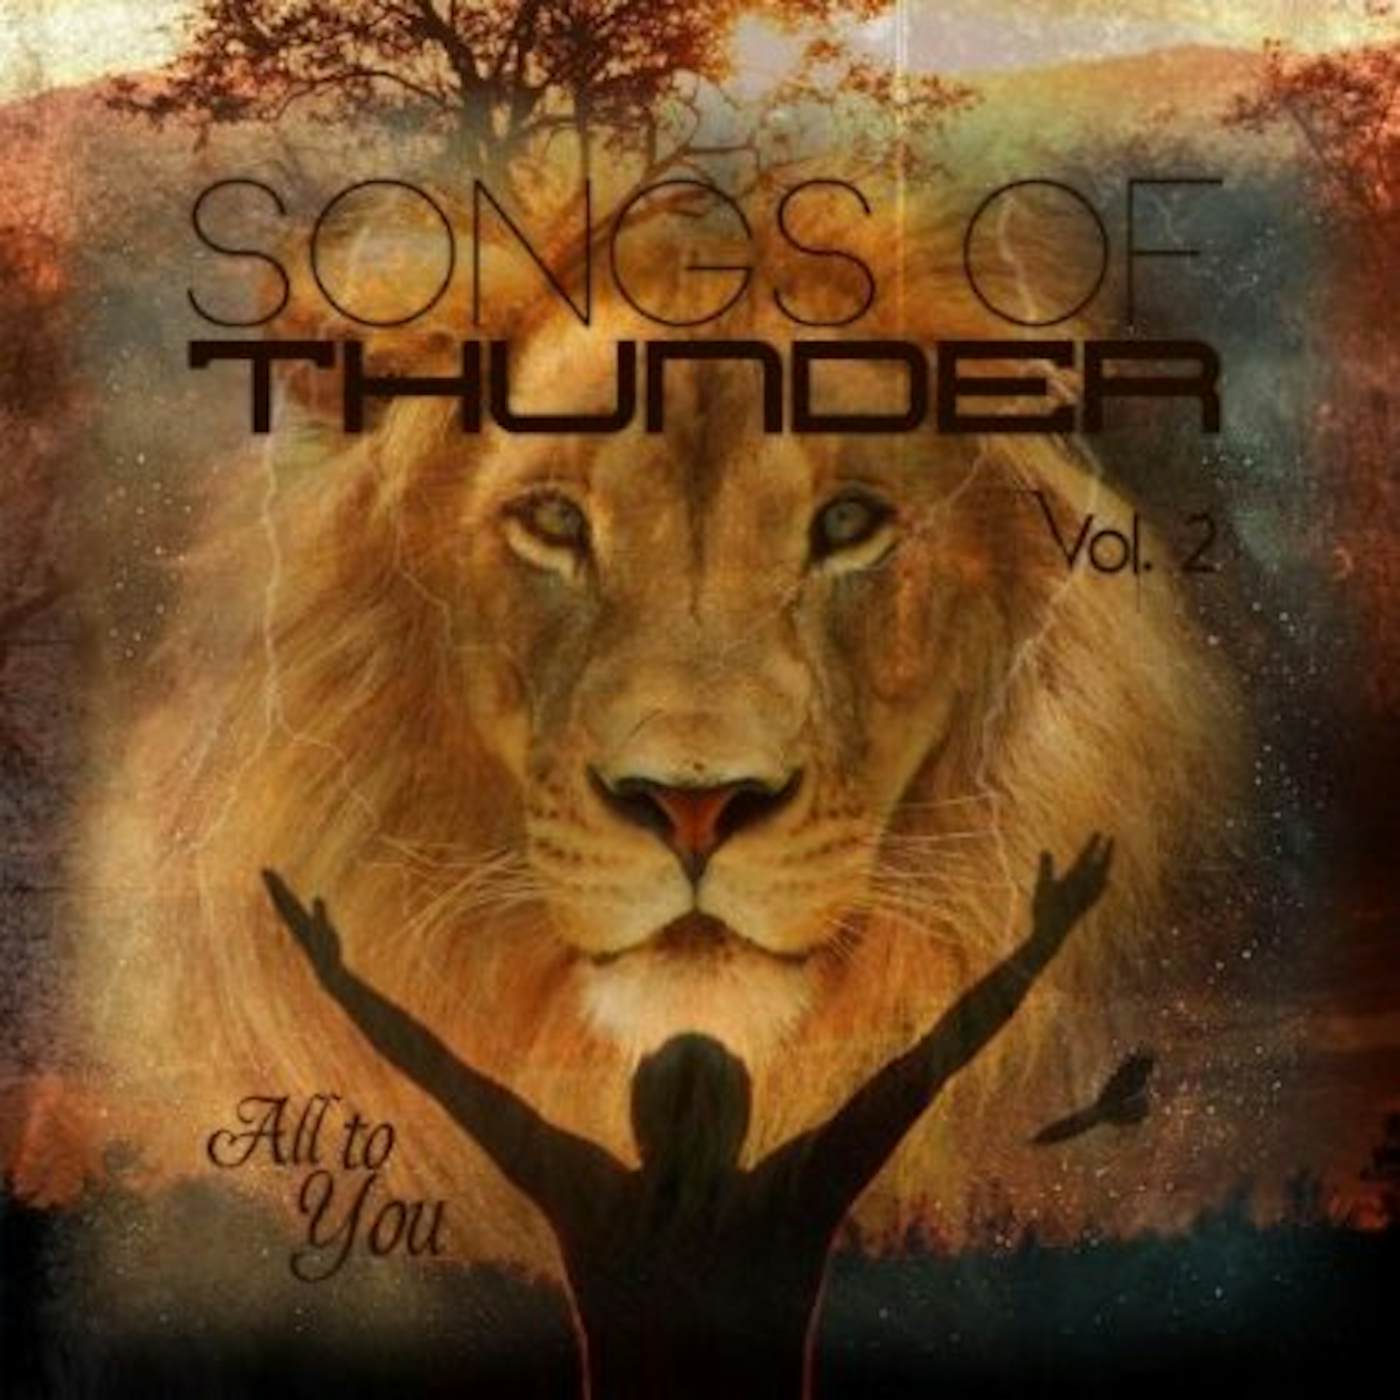 Harvest Sound SONGS OF THUNDER VOL. 2: ALL TO YOU CD